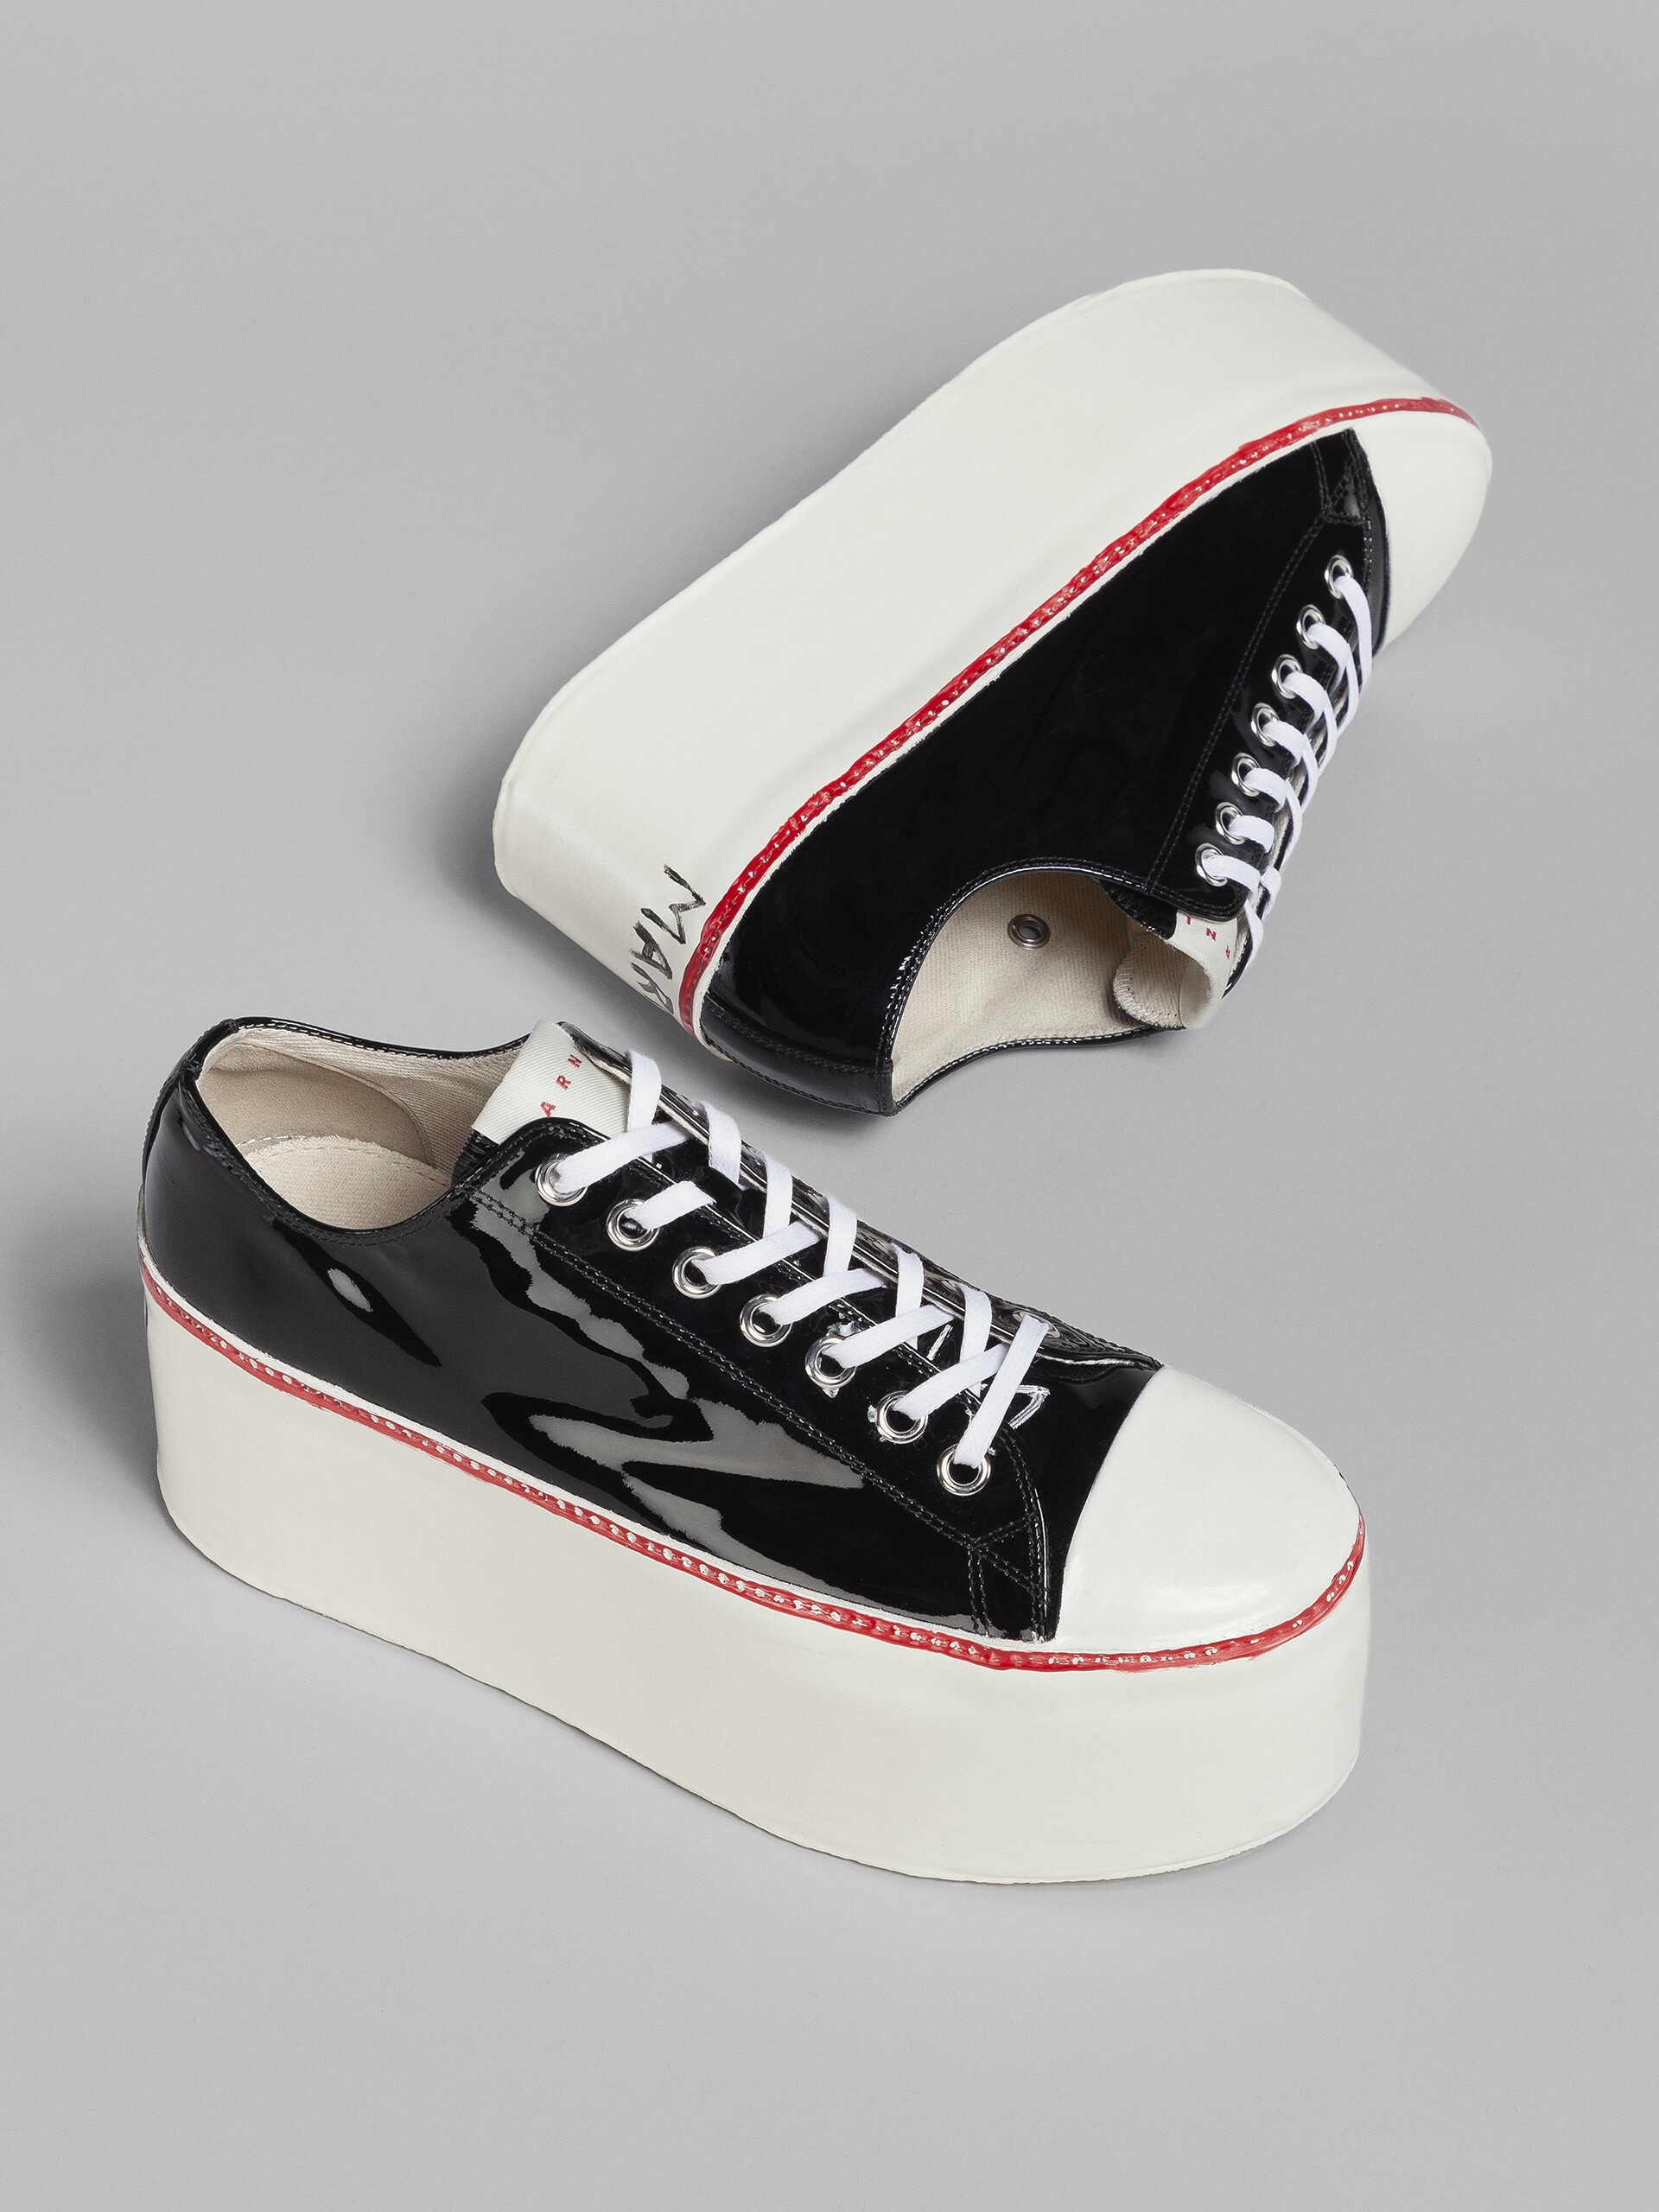 Patent leather platform sneaker - Sneakers - Image 5